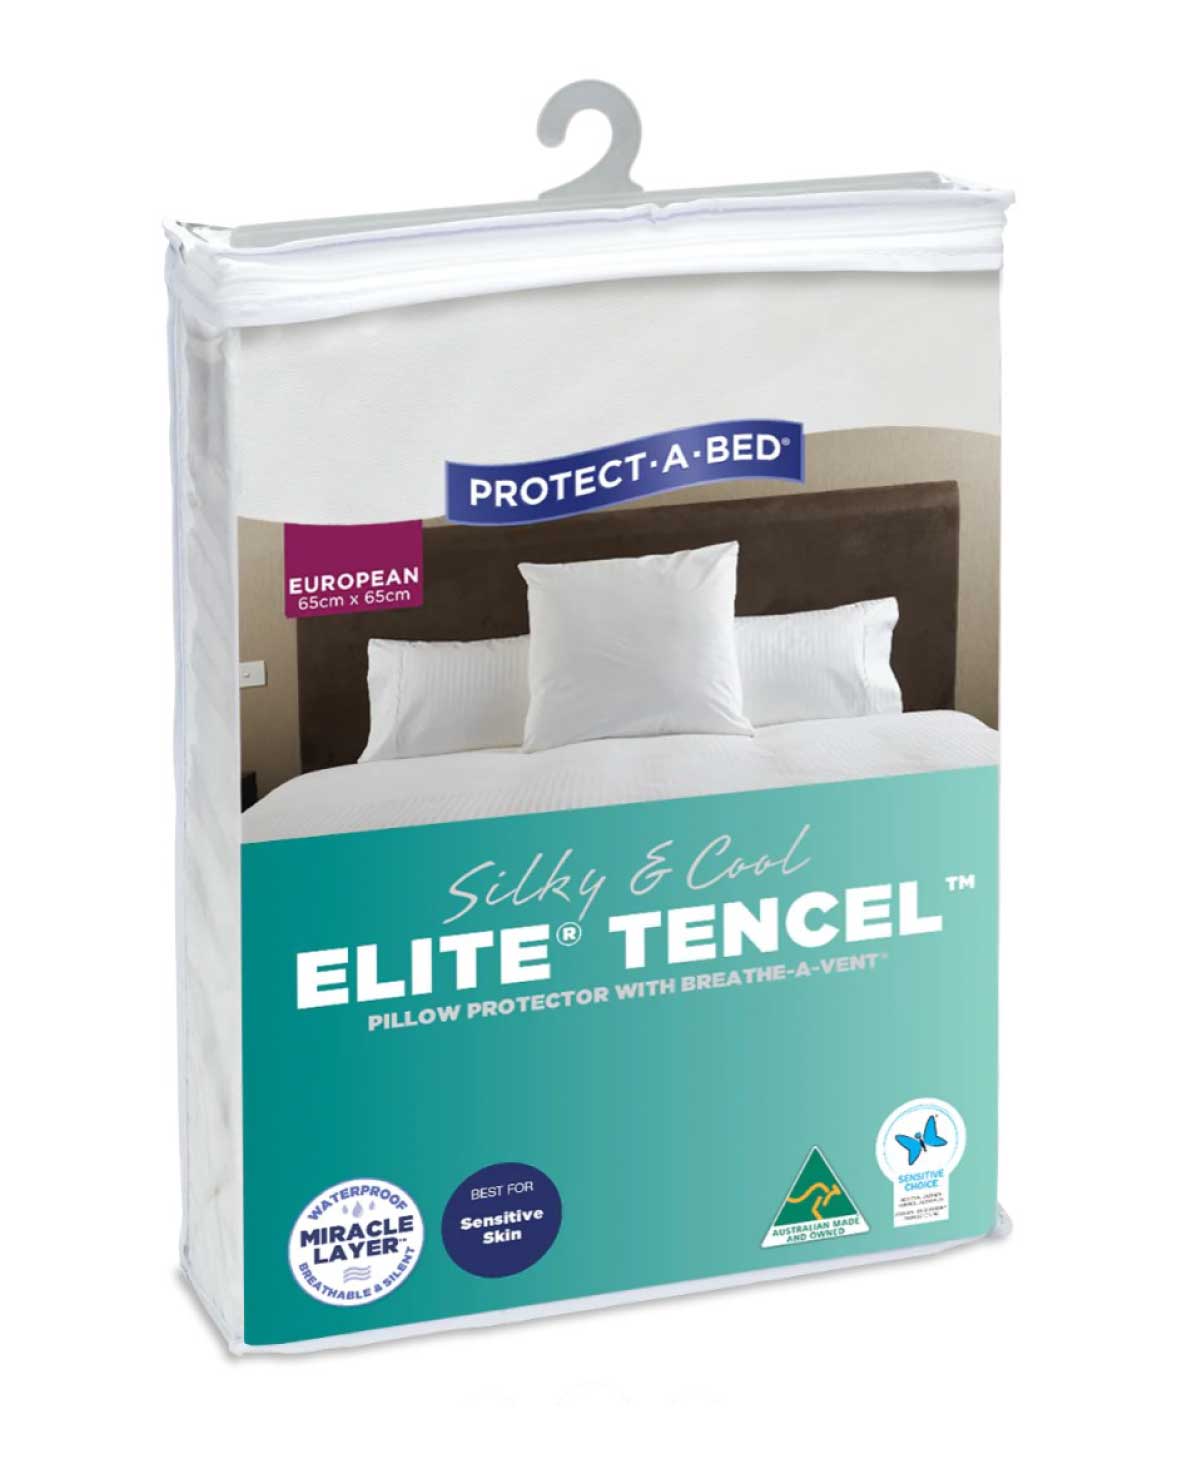 Protect-A-Bed Tencel Elite Pillow Protector - Mattress & Pillow ScienceProtection